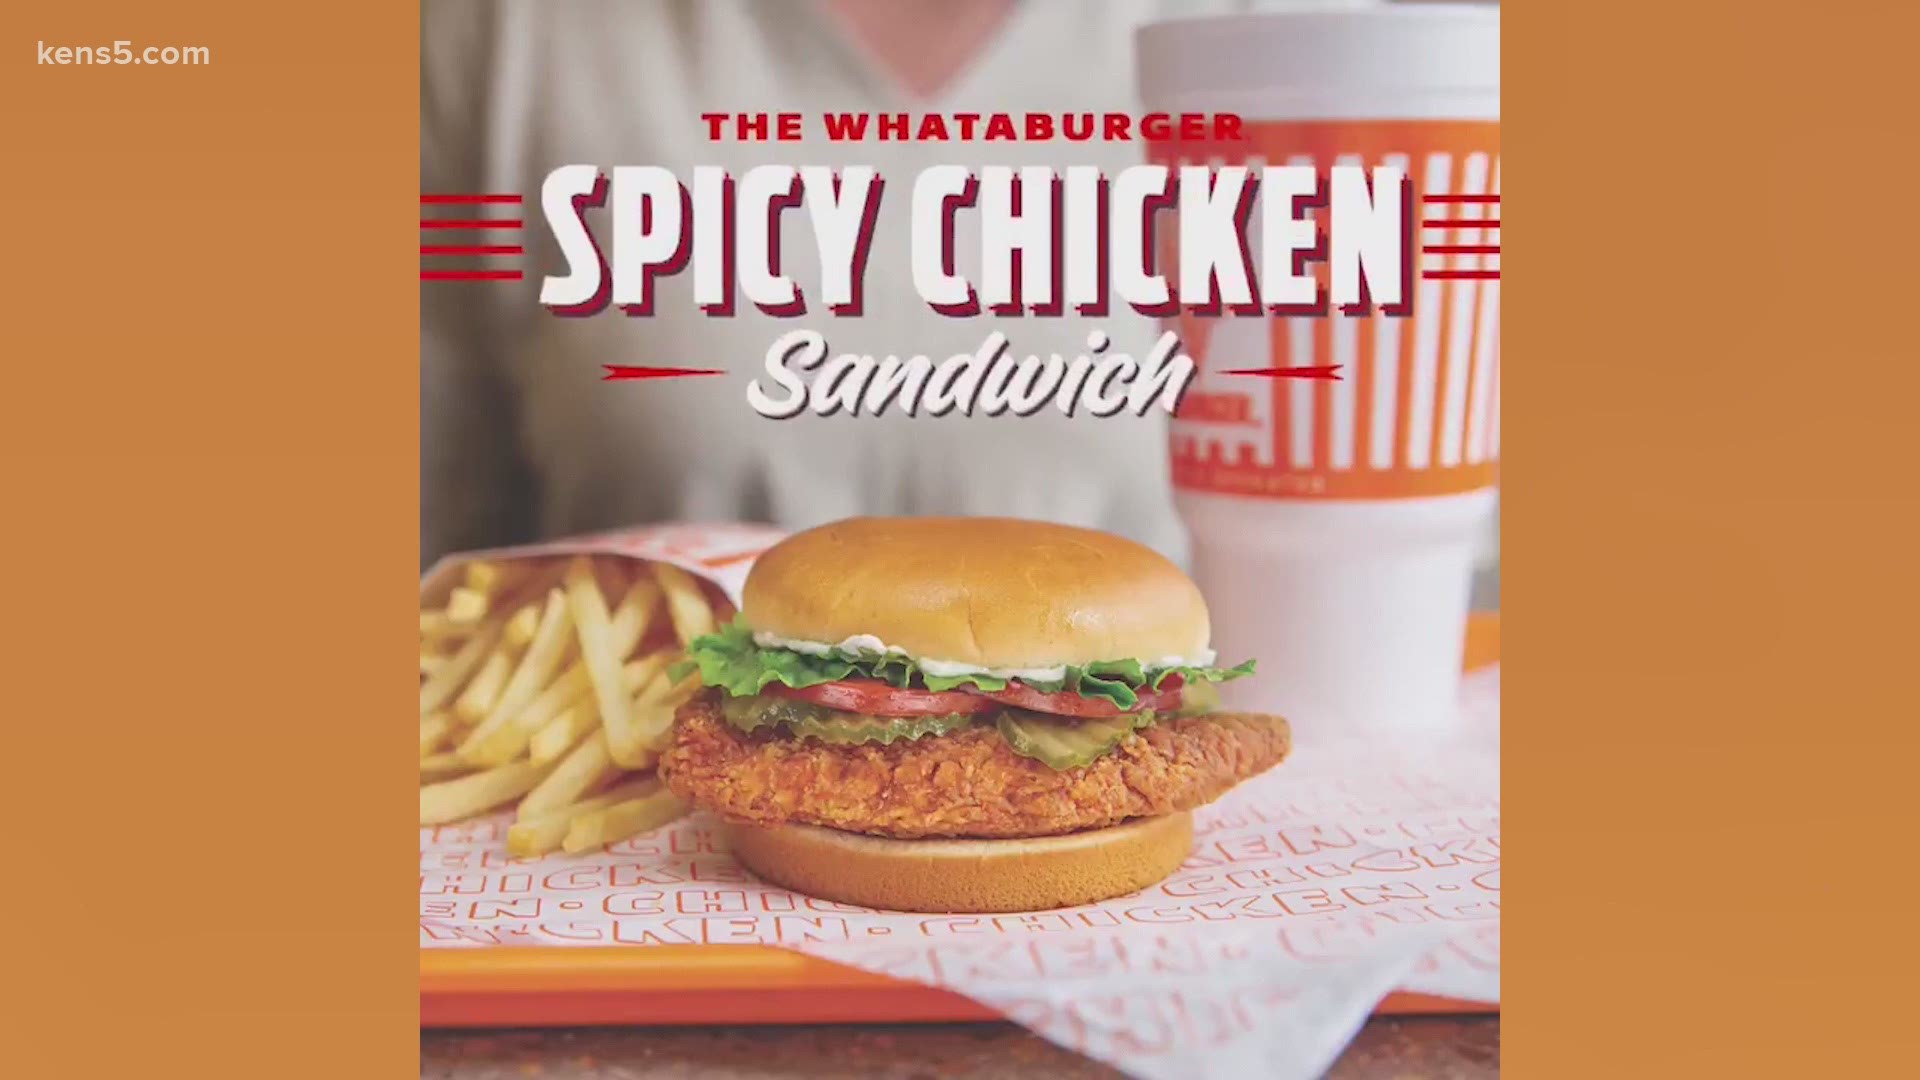 Whataburger is jumping into the chicken sandwich wars with its spicy chicken sandwich, which will only be available for a limited time.